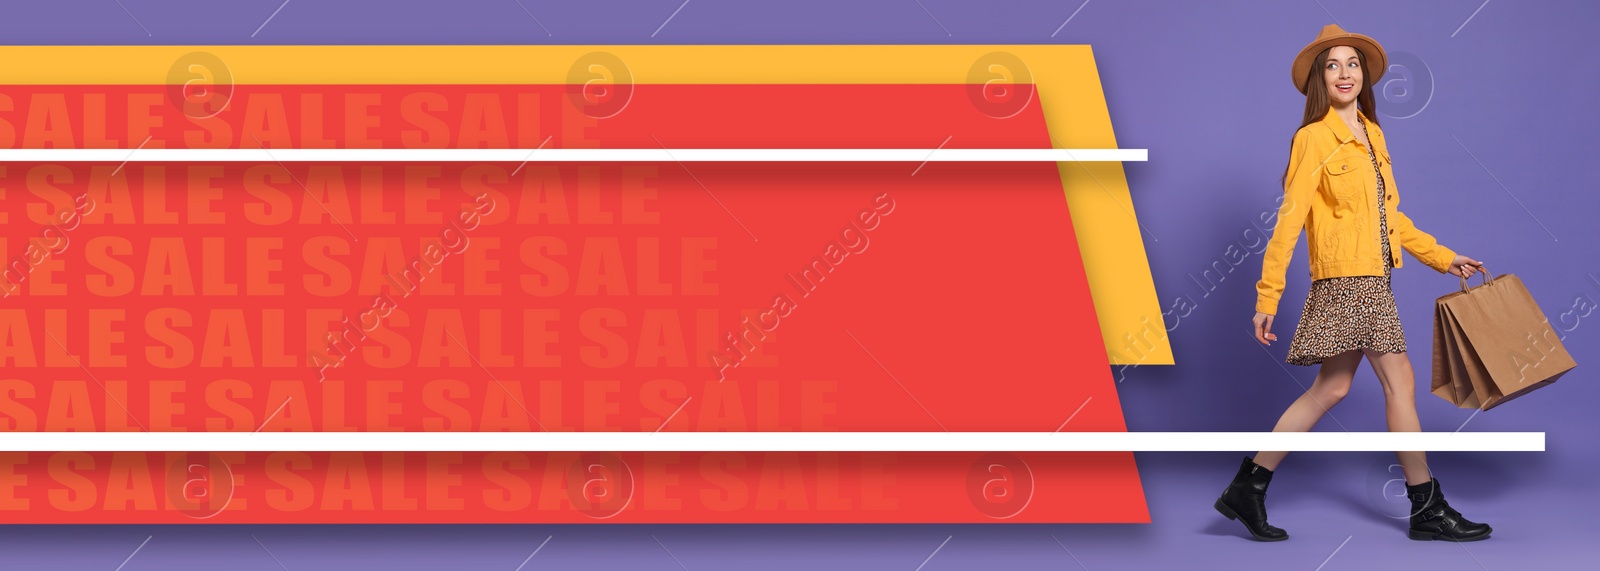 Image of Sale banner or flyer design. Stylish young woman with shopping bags on color background, space for text